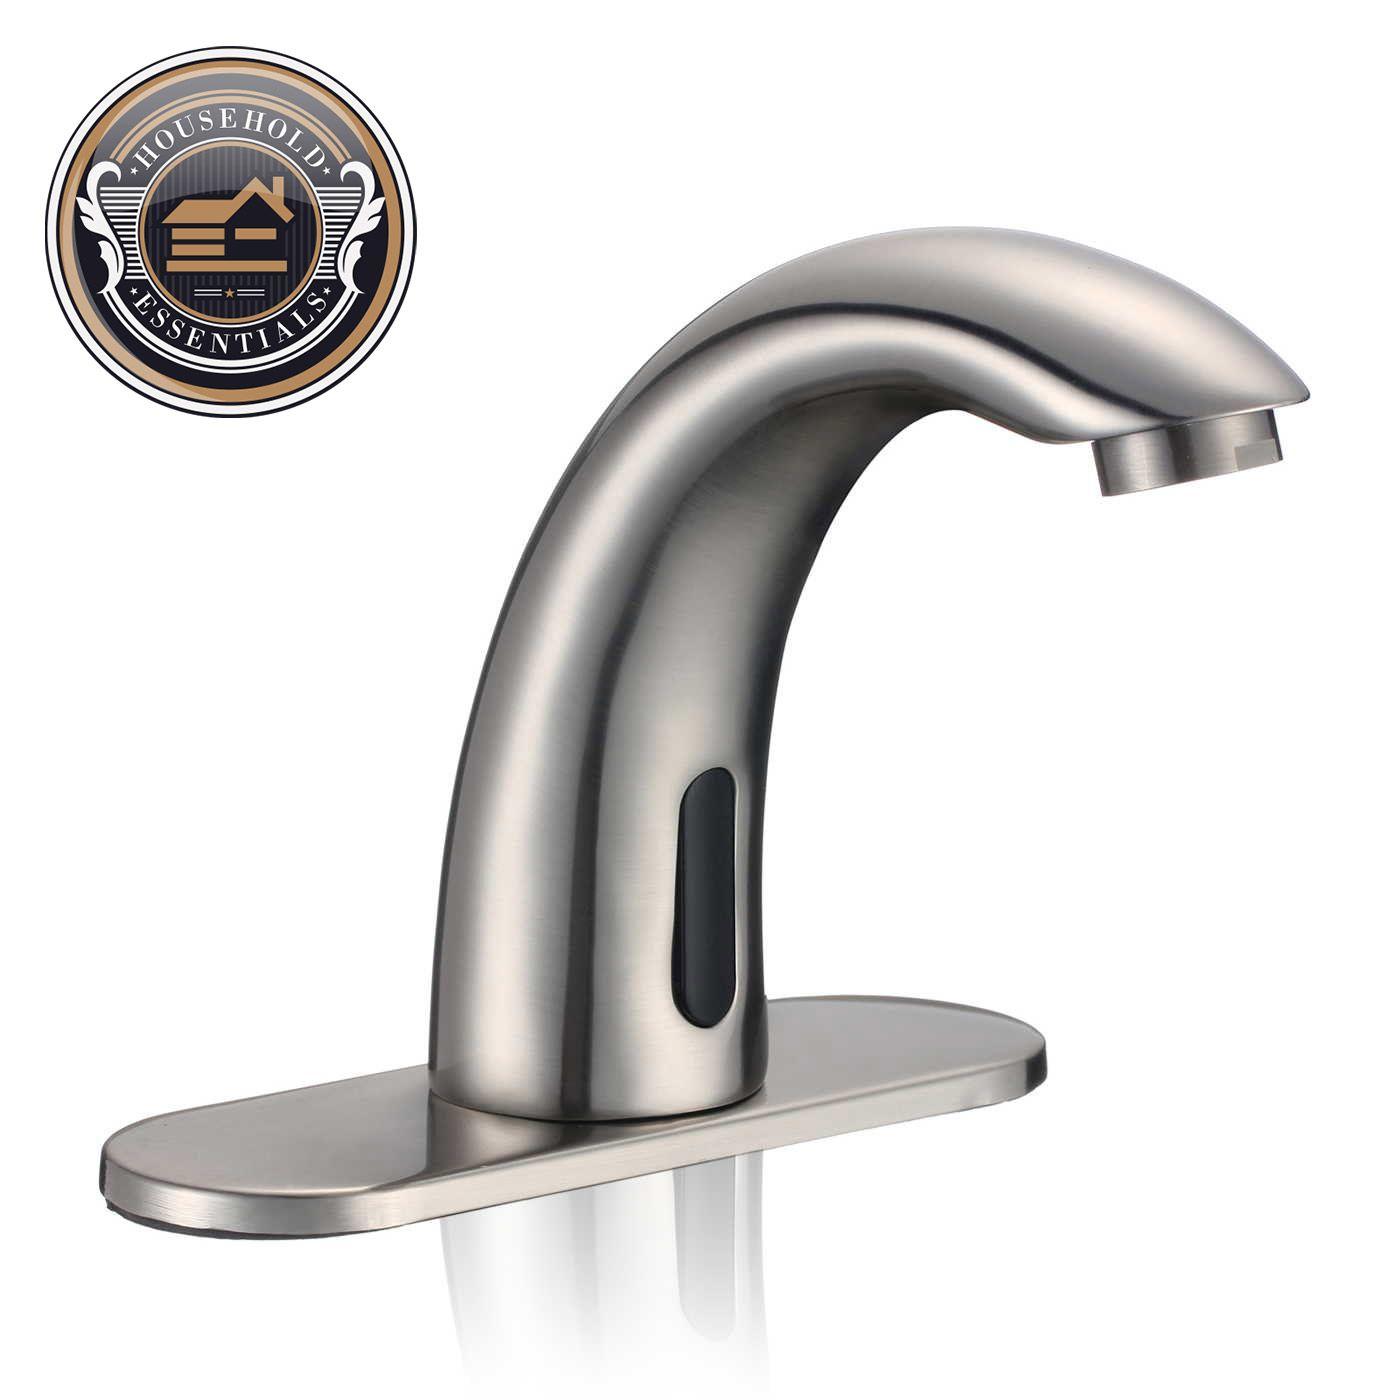 Bathroom Sink Logo - Touchless Bathroom Sink Faucet - Commercial Hands Free Tap | eBay